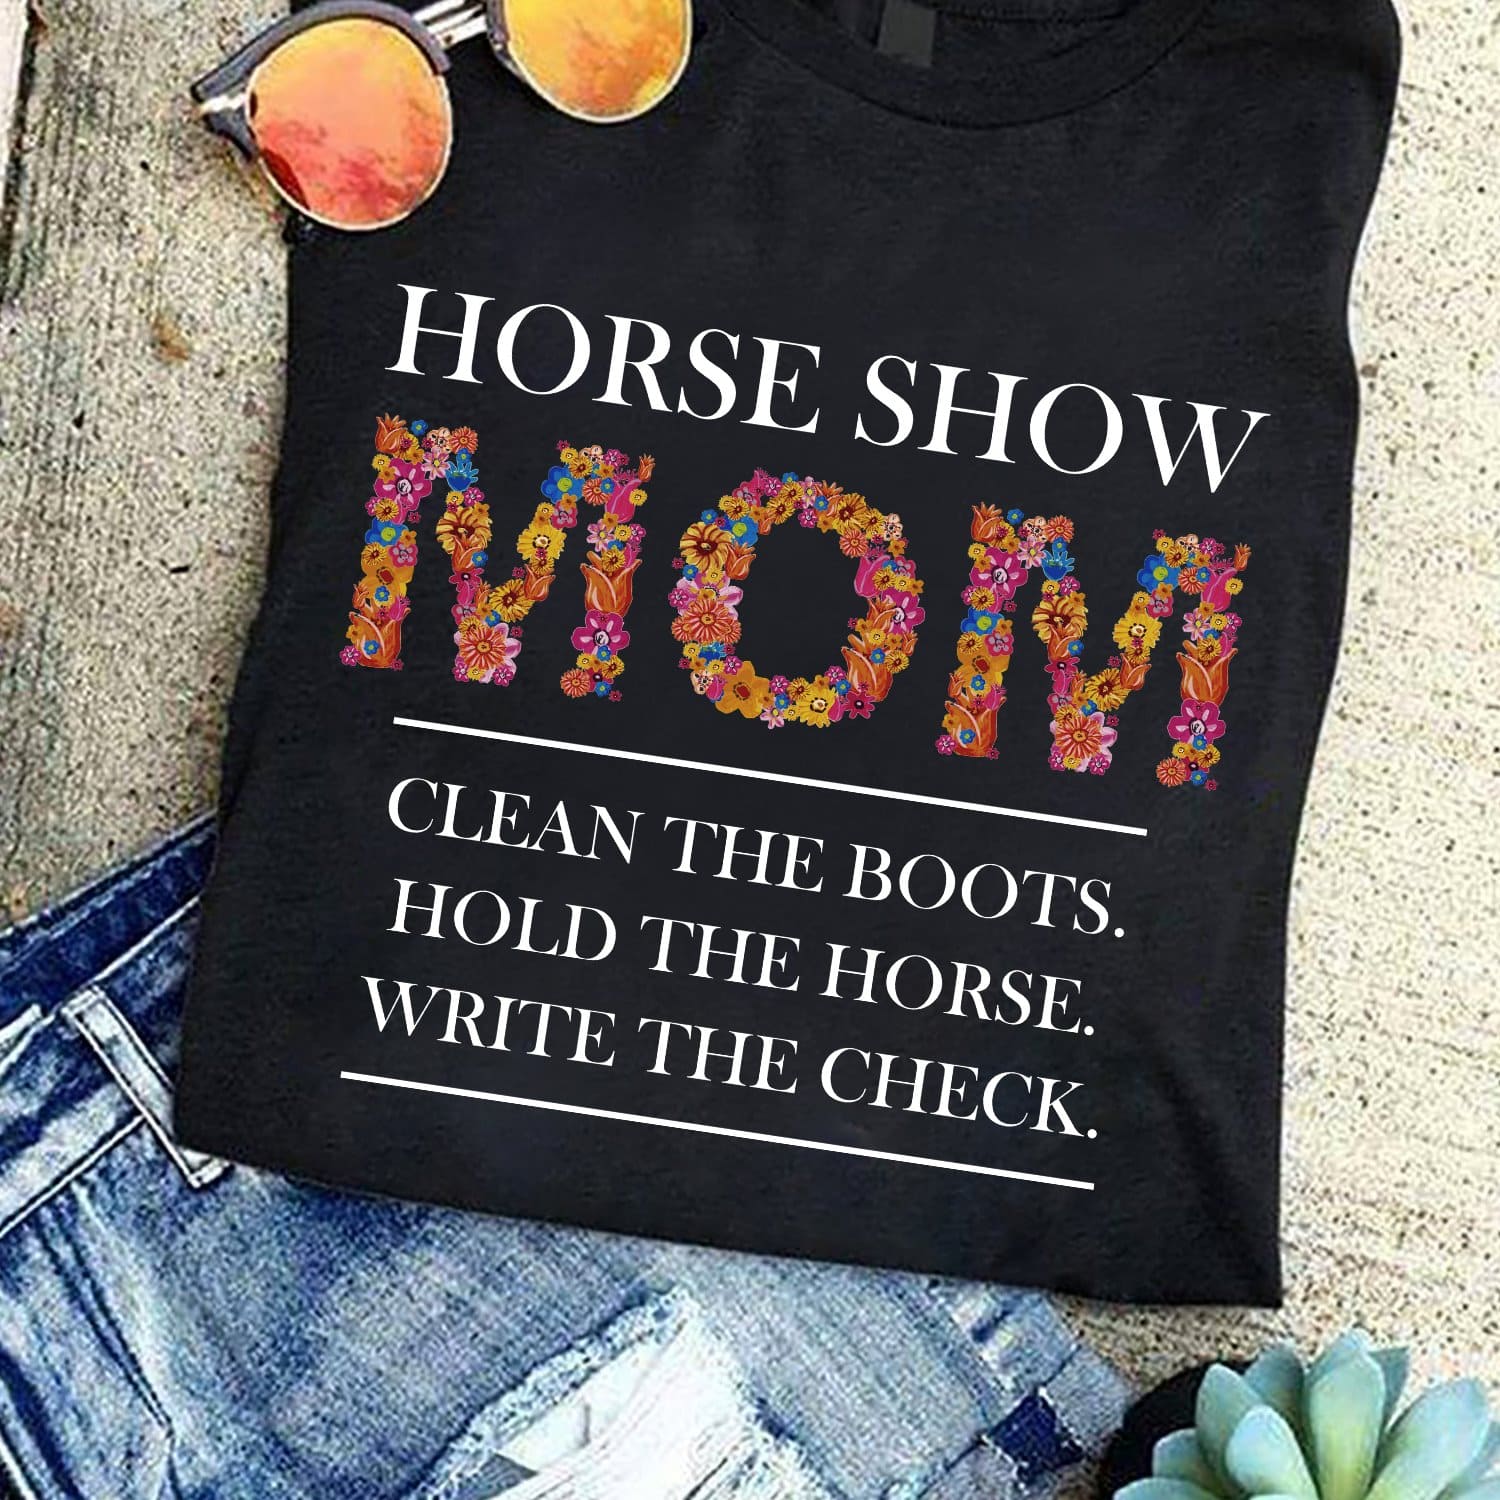 Horse show mom - Clean the boots, hold the horse, write the check